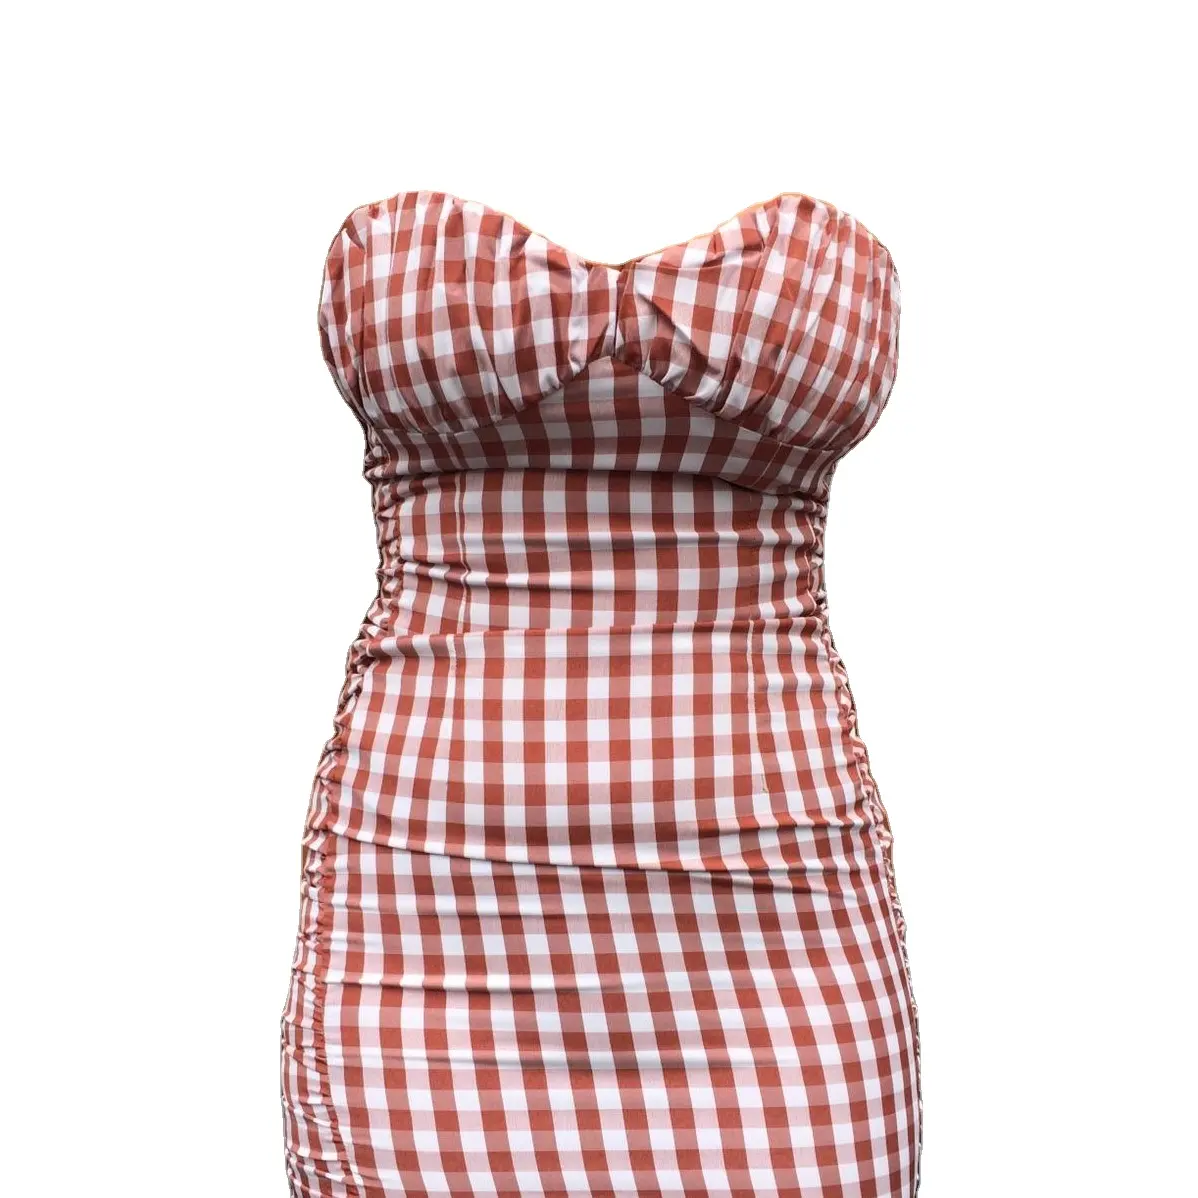 New Arrival Customized Gingham Print Ruched Bust Side Gathered Sexy Low Back Casual Sleeveless Fancy Mini Bodycon Dress